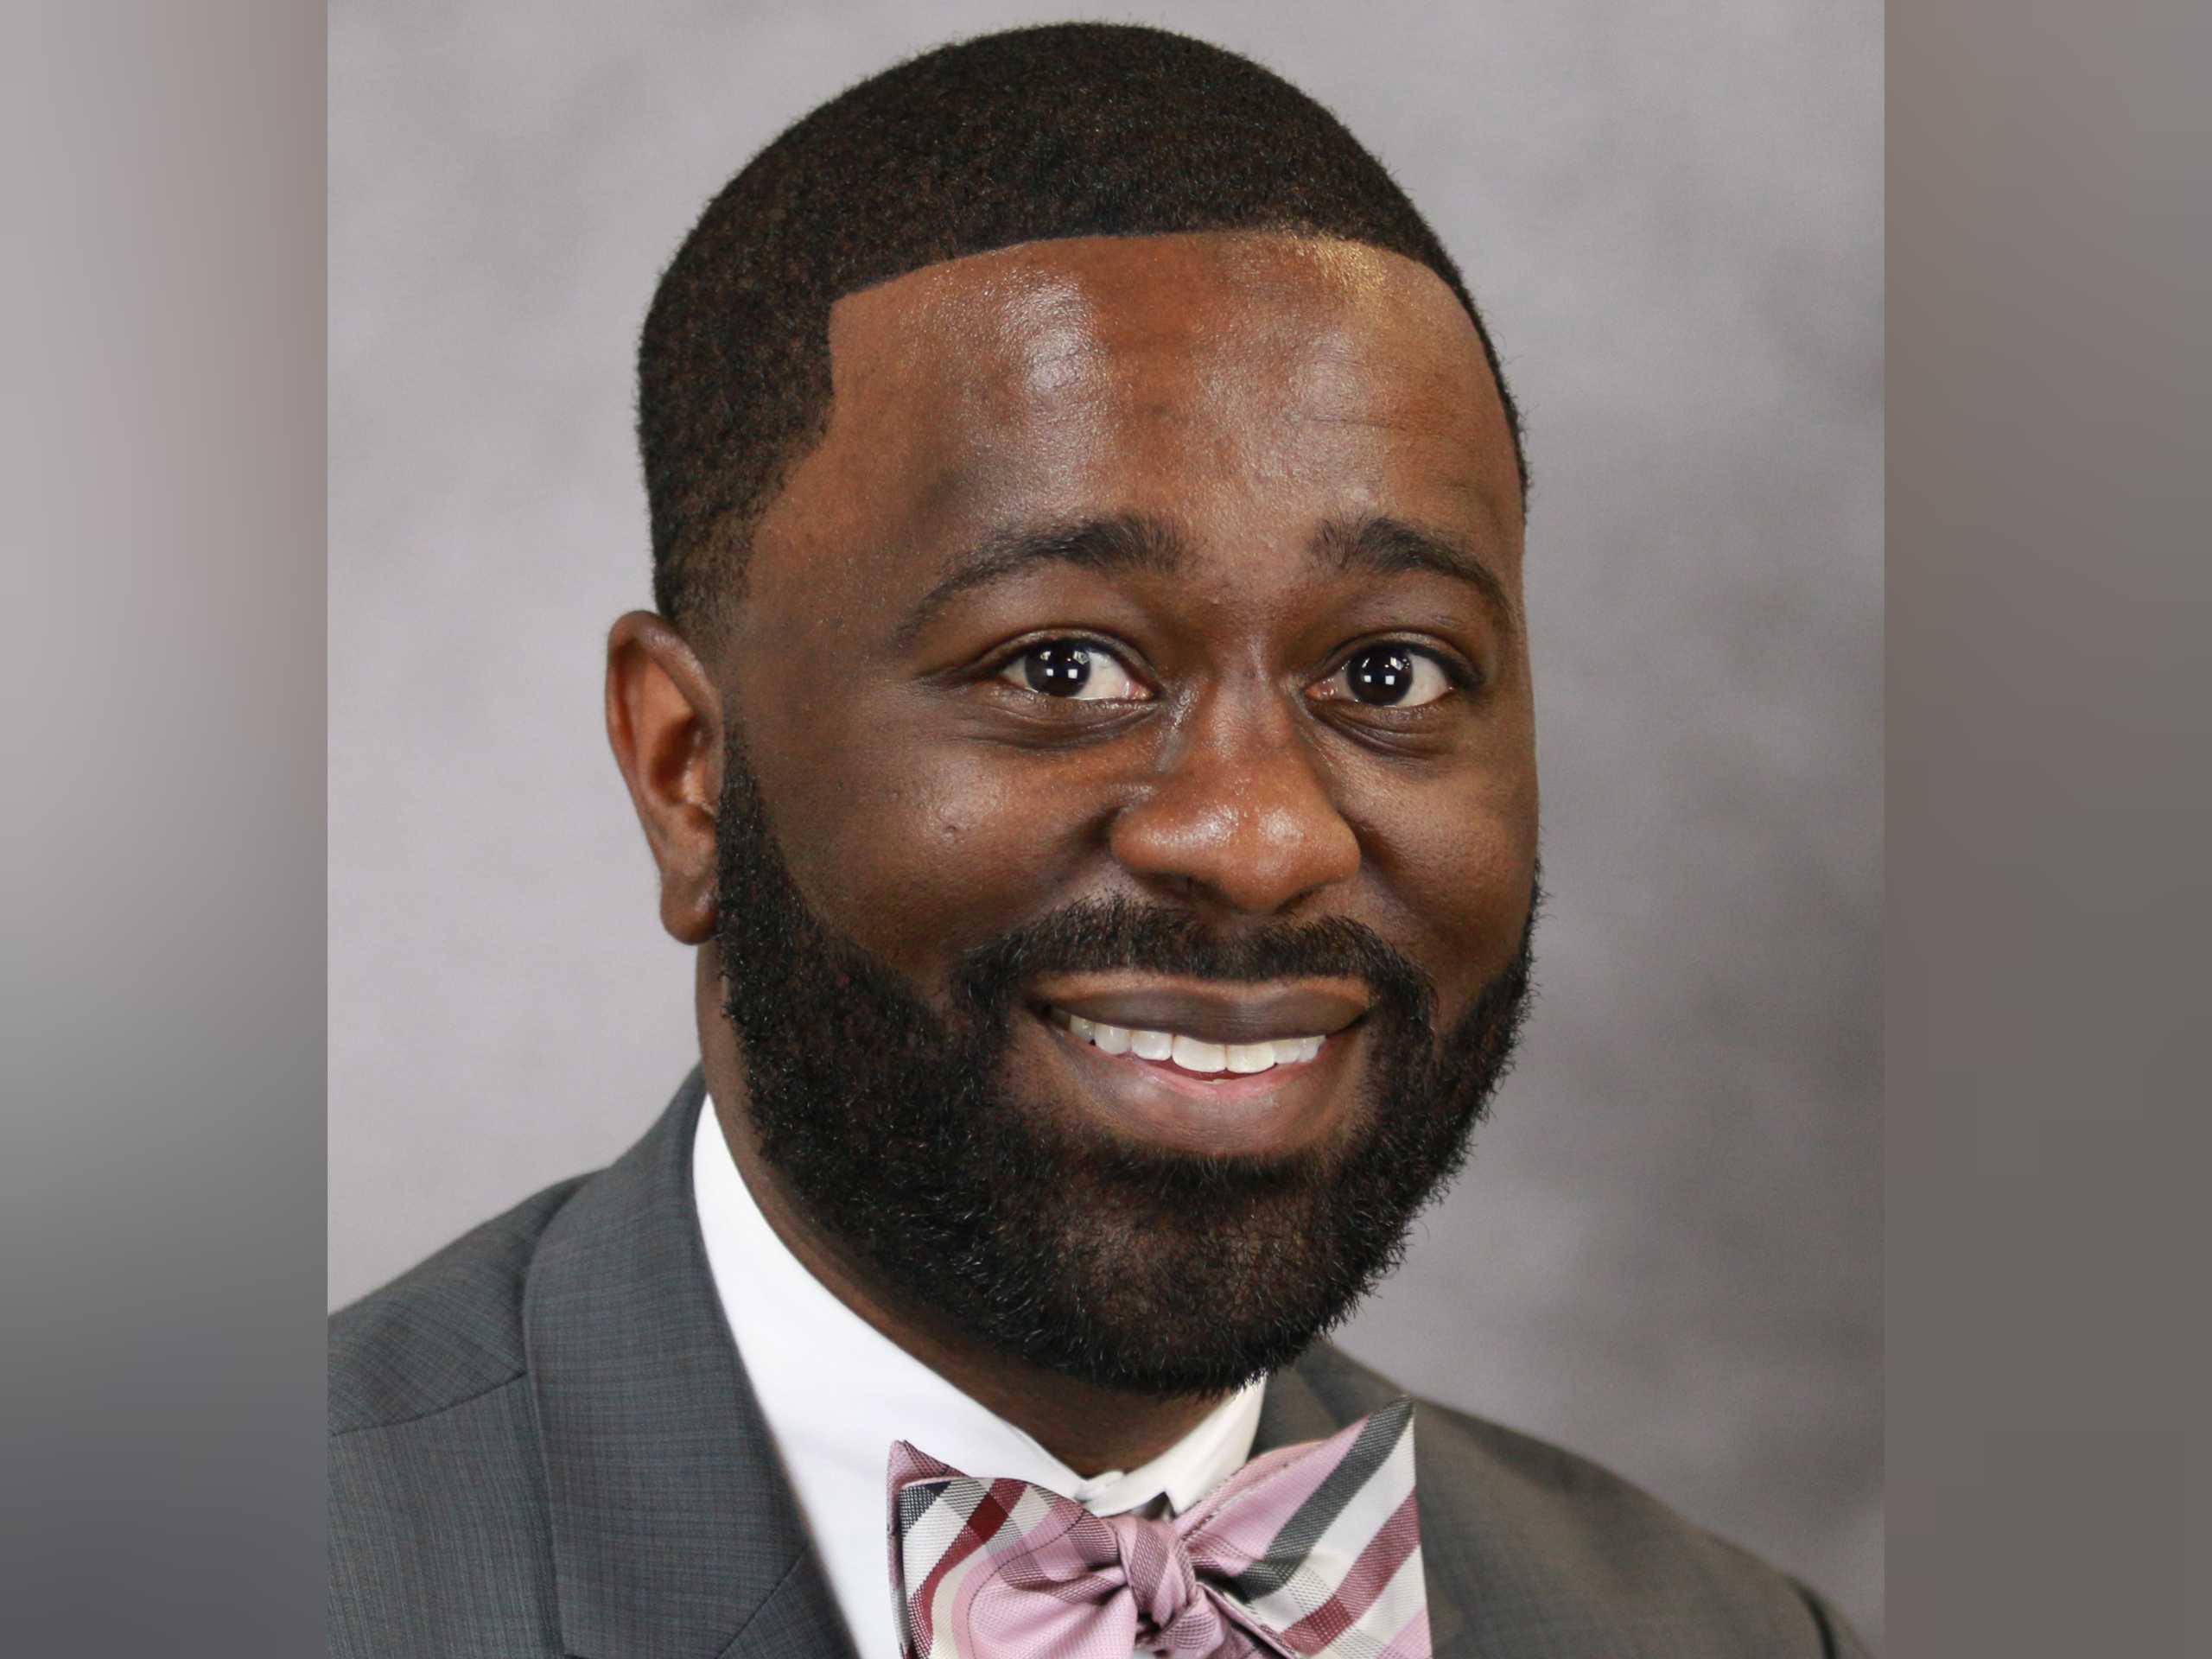 Getting to Know You: Dr. Marcus Dumas